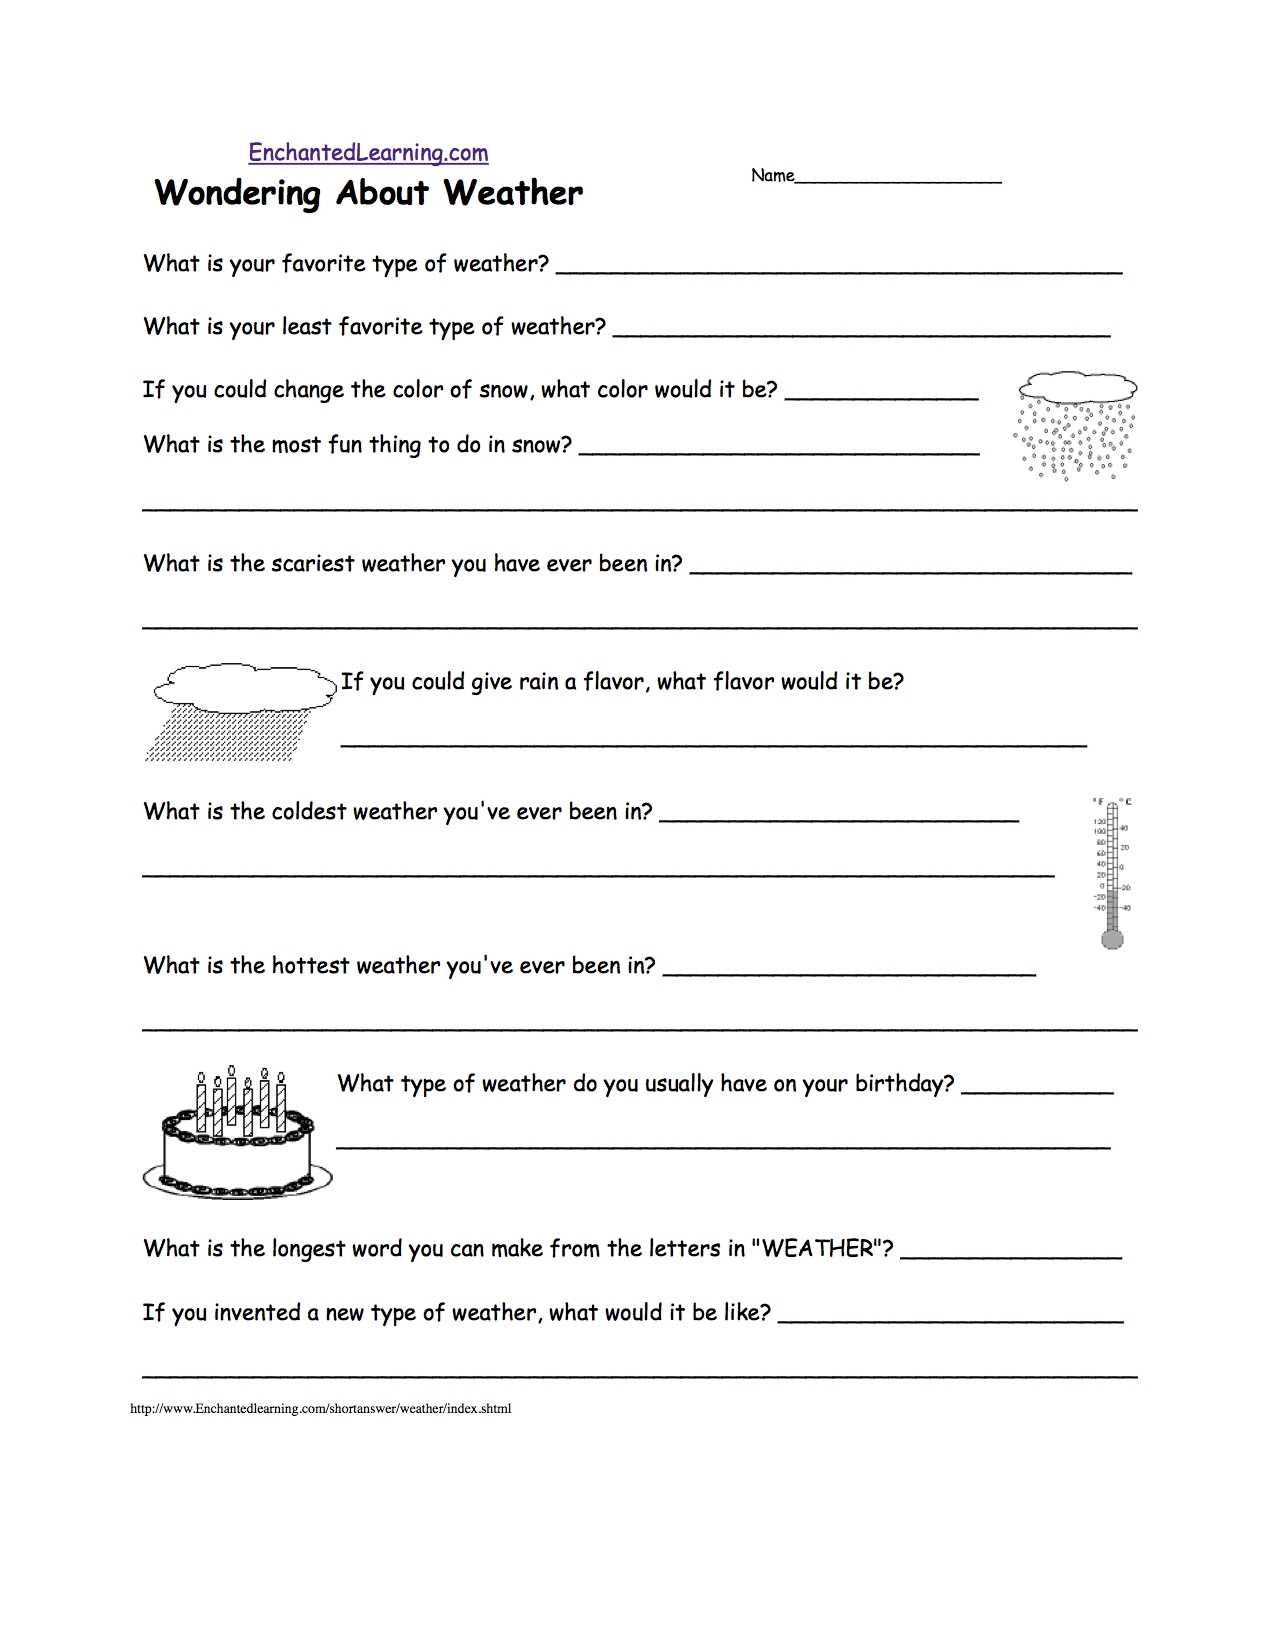 Positive Thinking Worksheets together with Rain Worksheet Download